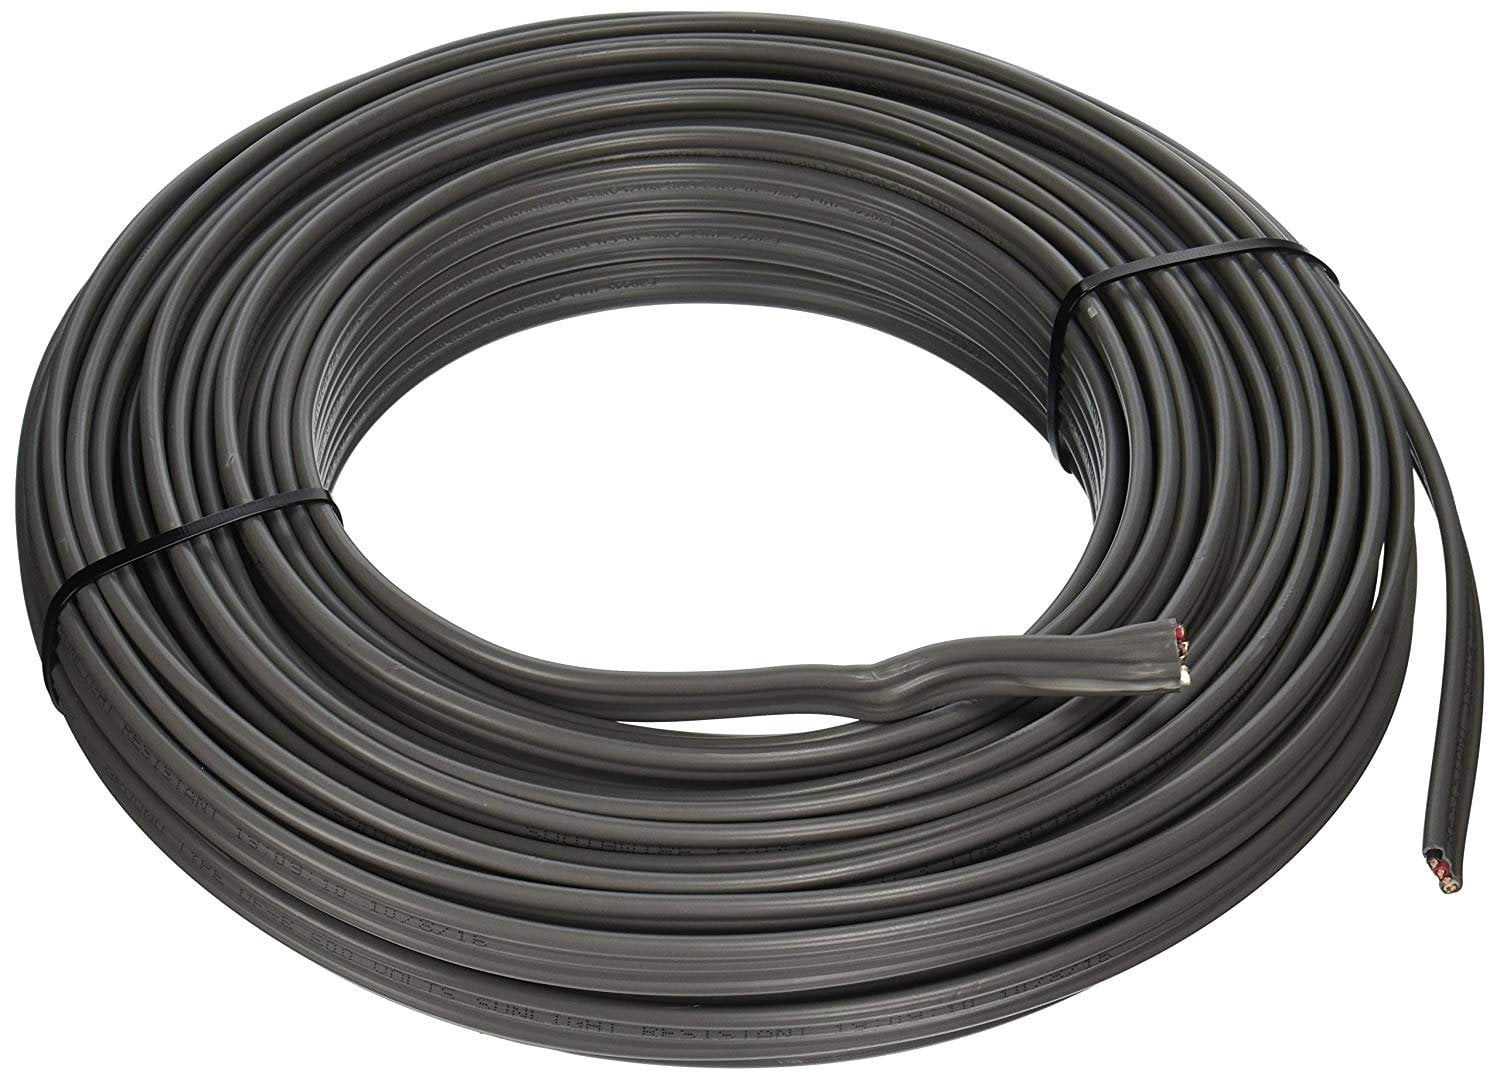 12/2 W/GR 40' FT UF-B OUTDOOR DIRECT BURIAL/SUNLIGHT RESISTANT ELECTRICAL WIRE 